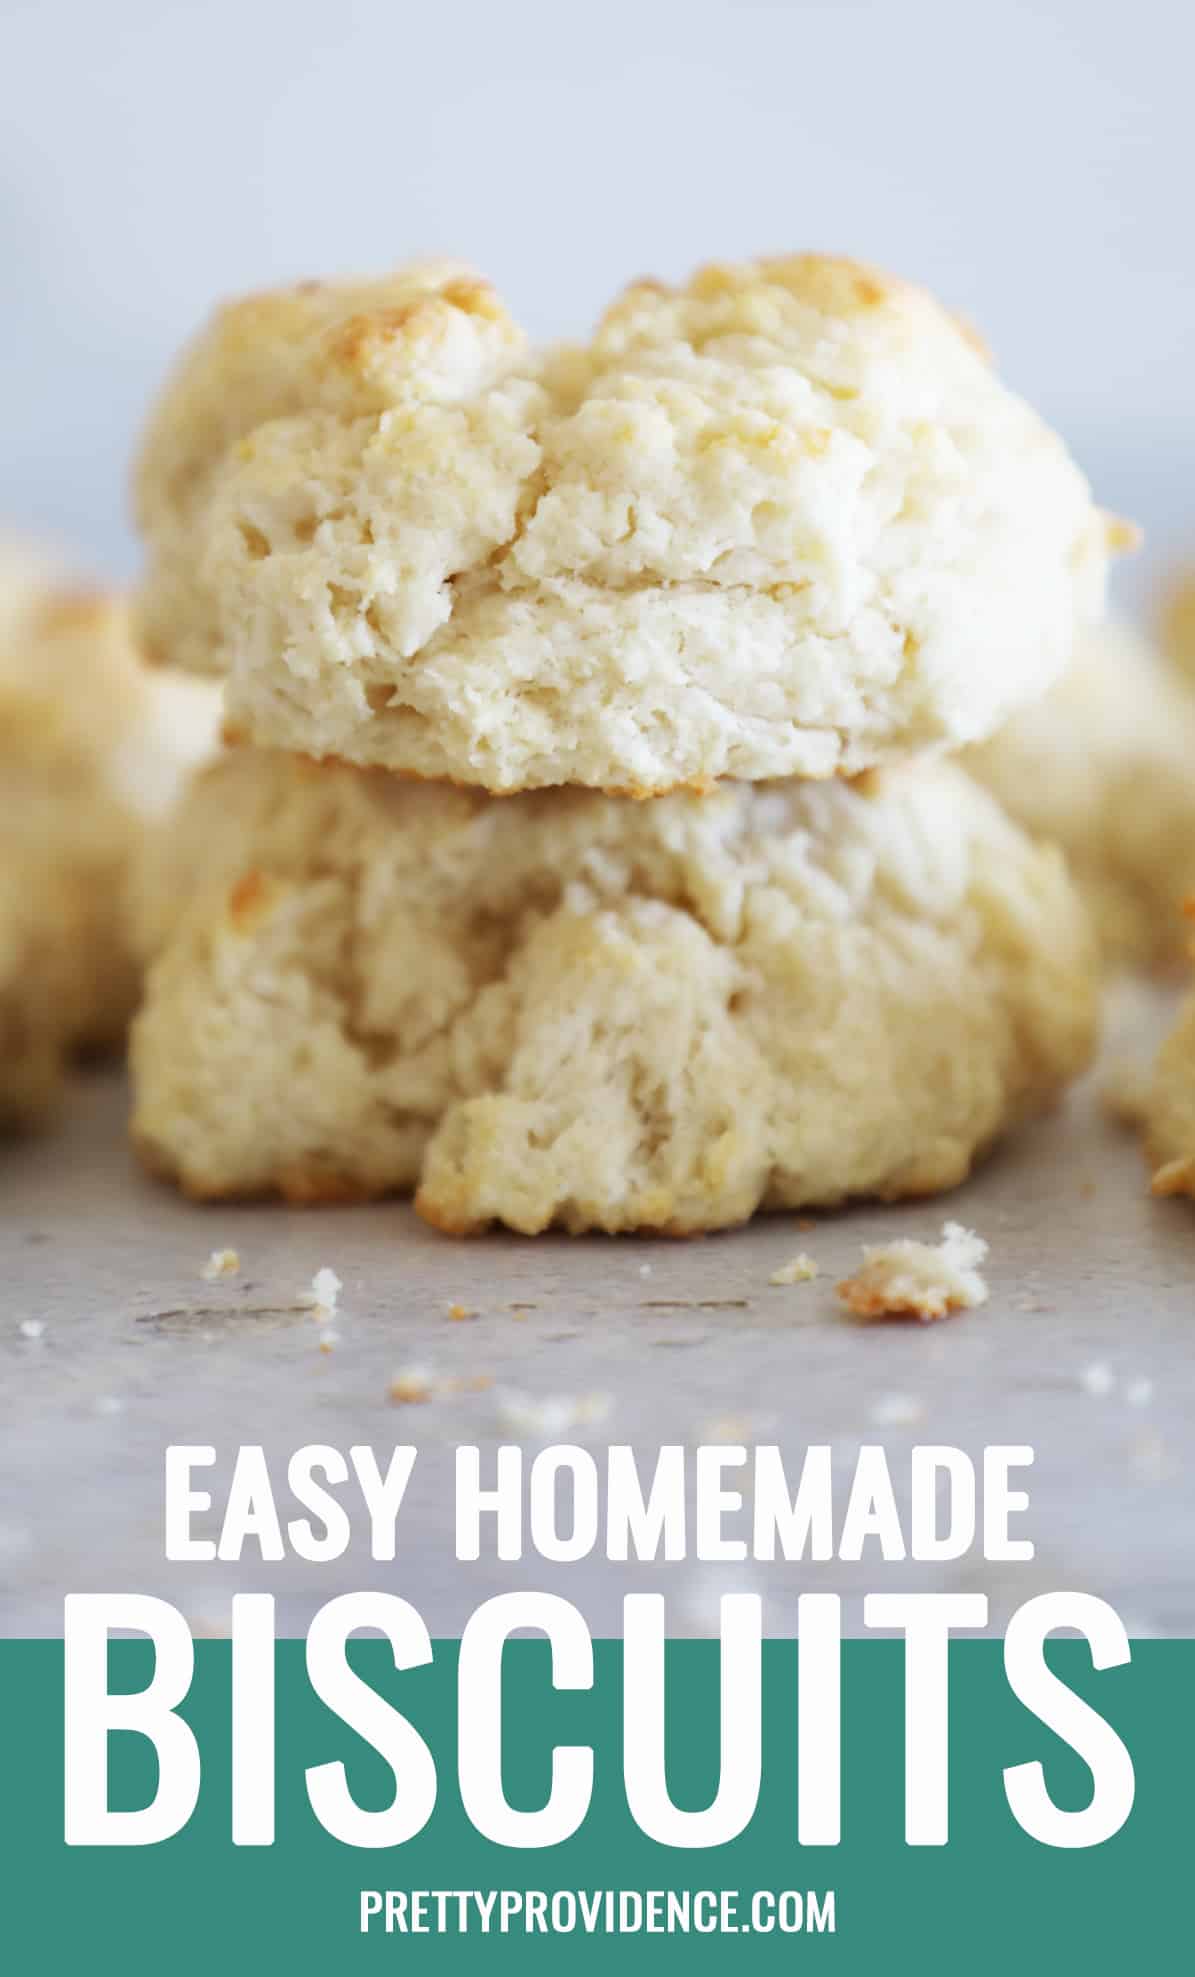 Quick Homemade Biscuits without Buttermilk